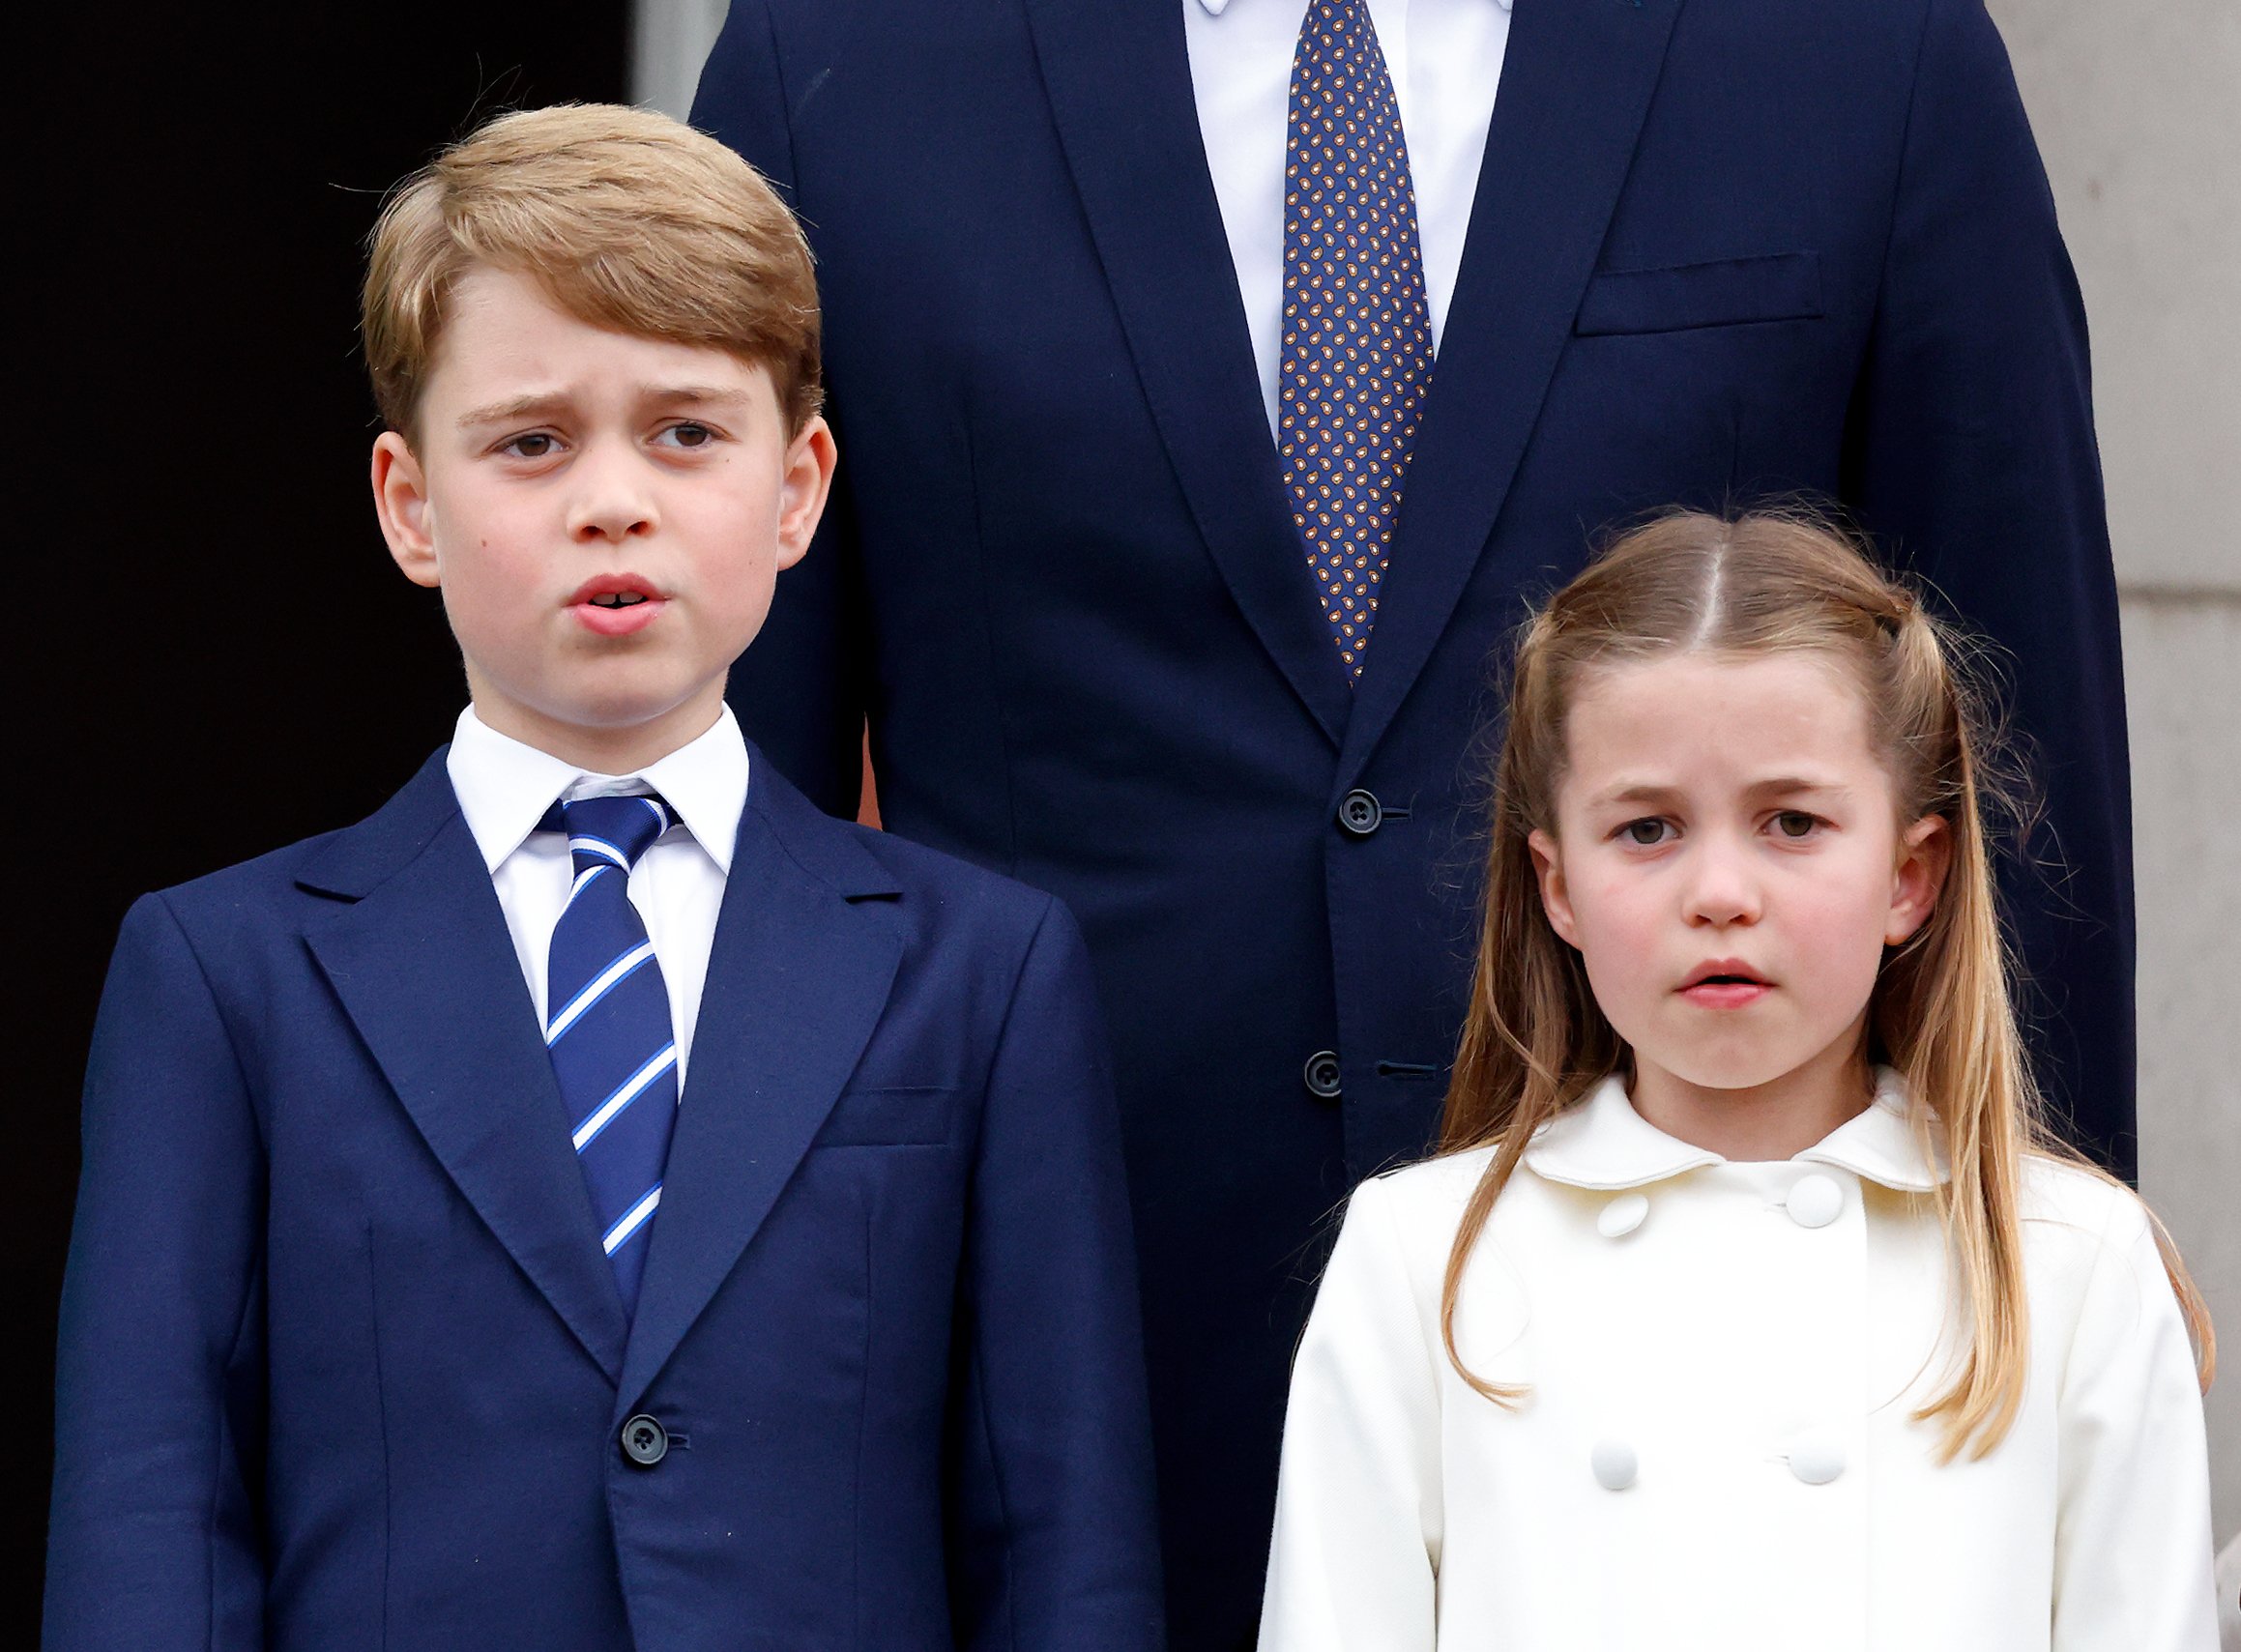  Prince George of Cambridge and Princess Charlotte of Cambridge stand on the balcony of Buckingham Palace following the Platinum Pageant on June 5, 2022 in London, England | Source: Getty Images